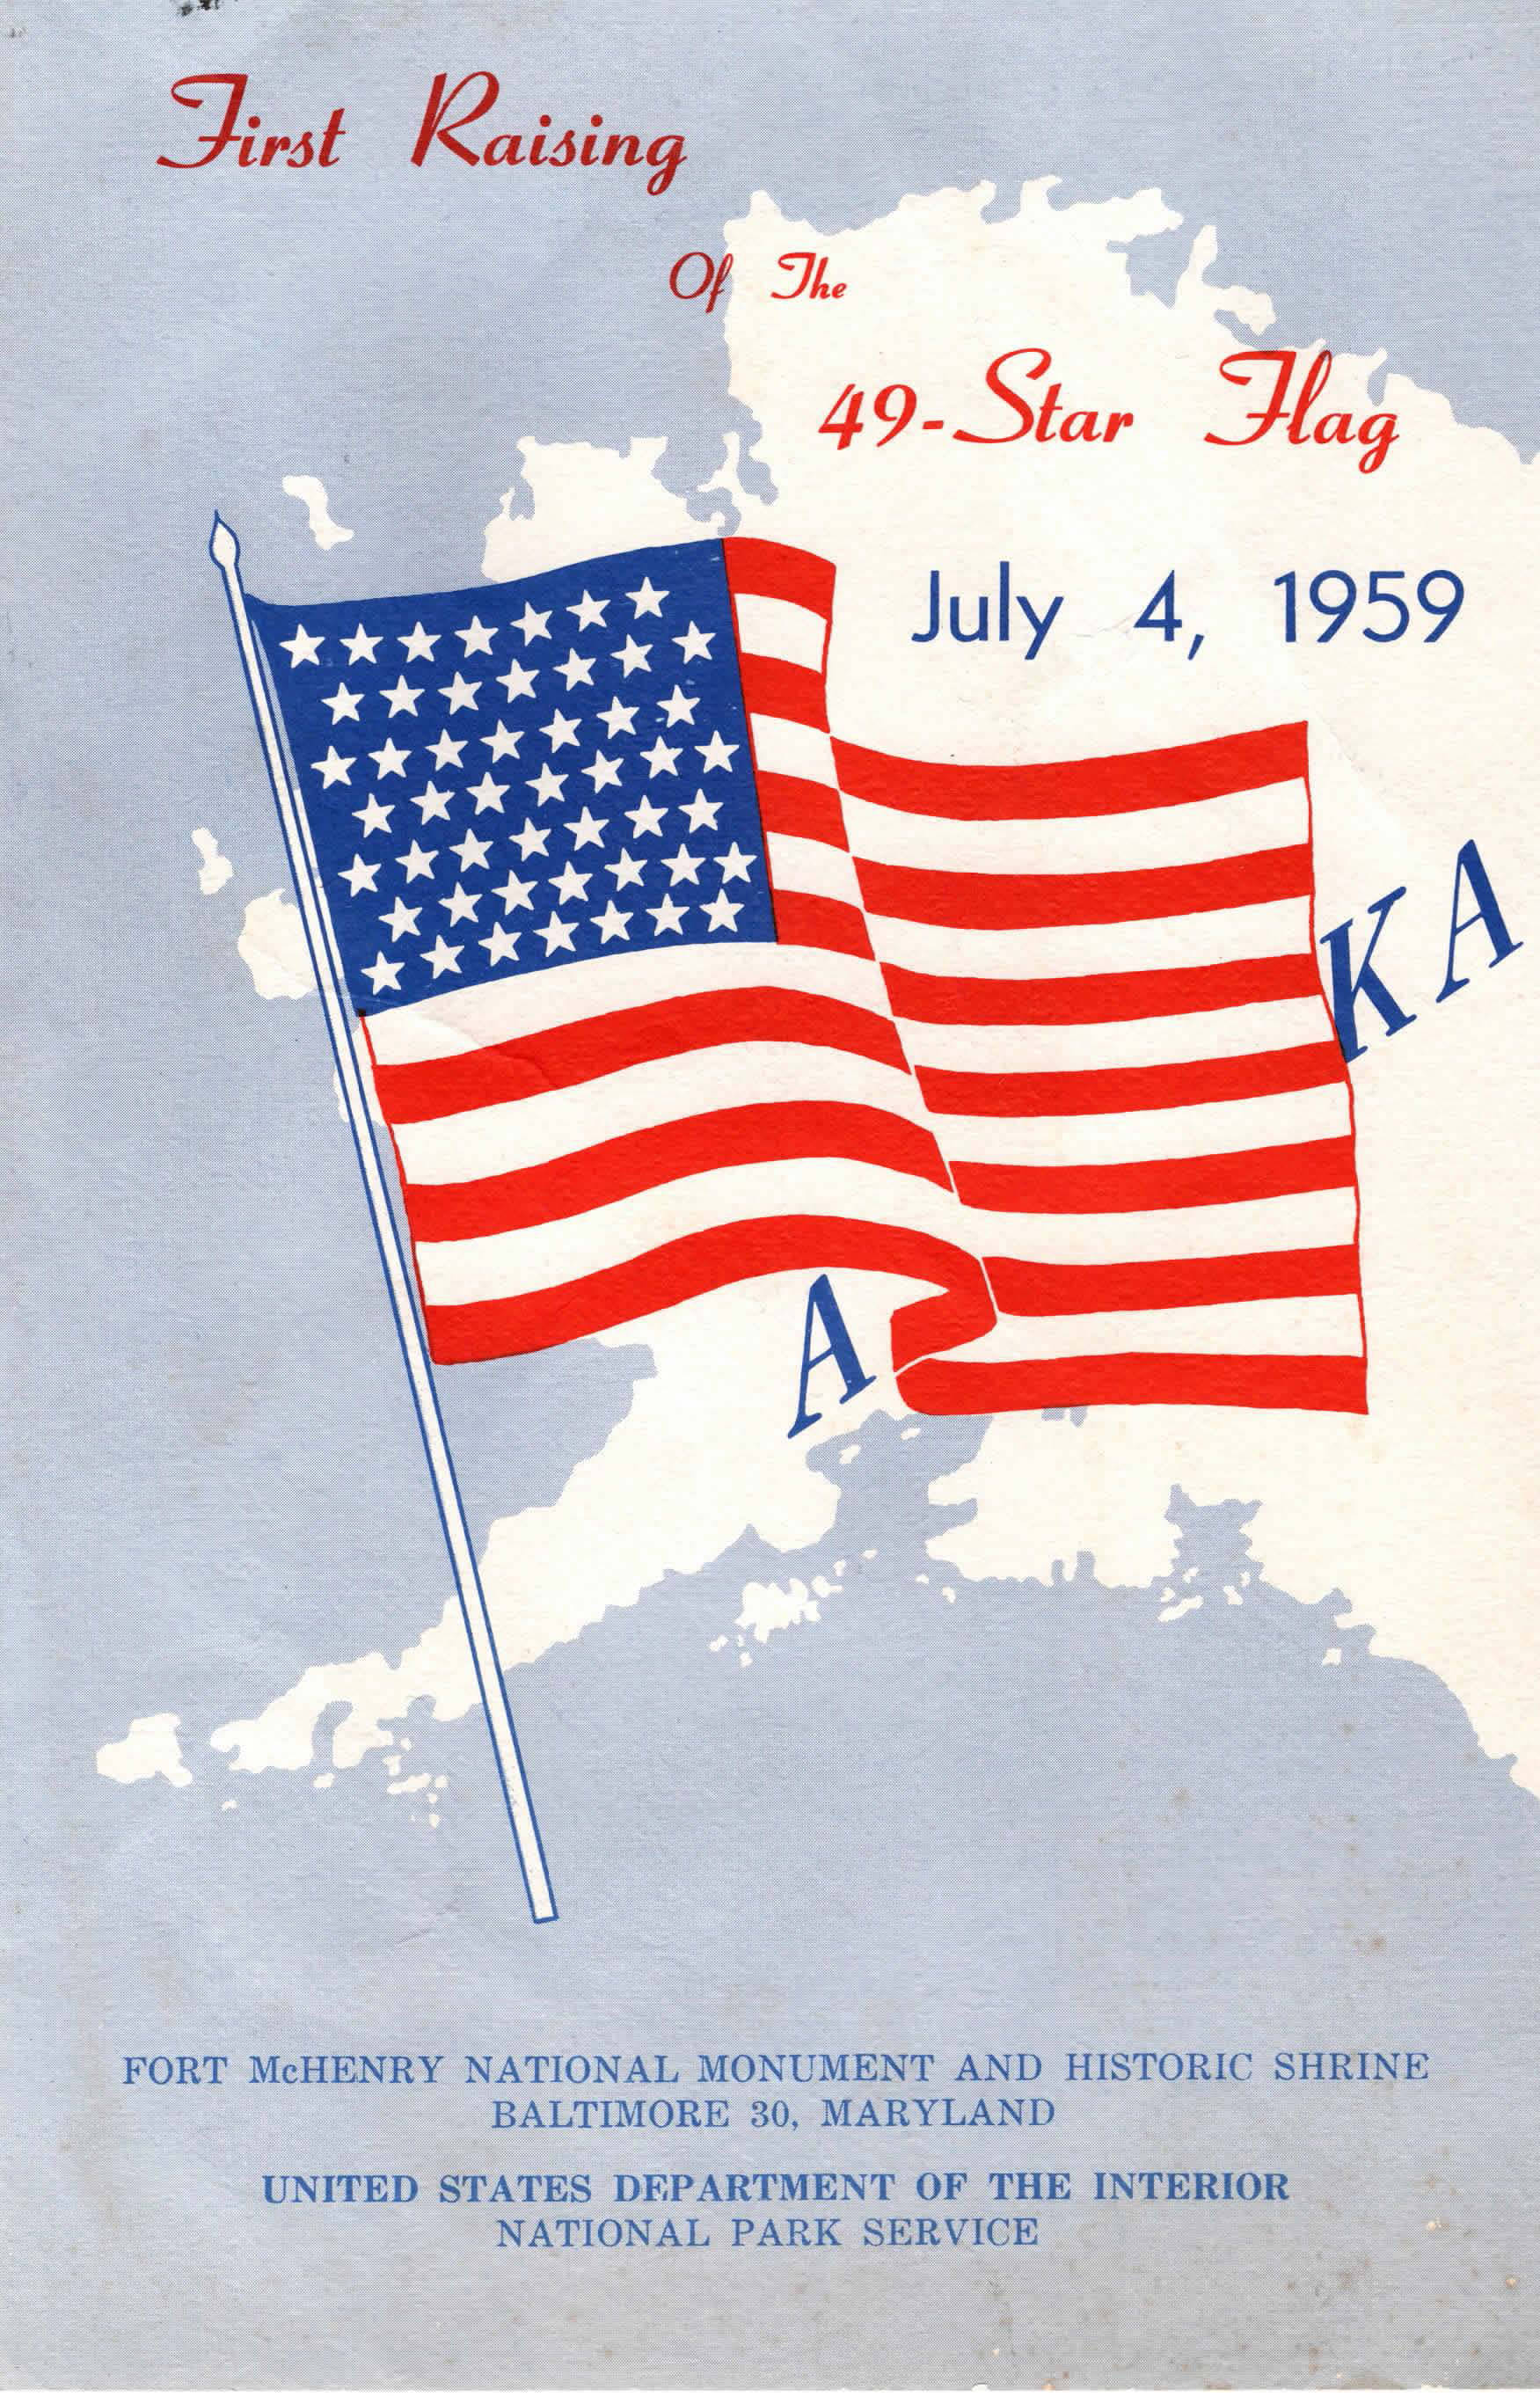 The cover of the program for the first raising of the 49-star U.S. flag on July 4, 1959, at Fort McHenry National Monument in Baltimore, Maryland. (Photo by Marcia Kuszmaul)